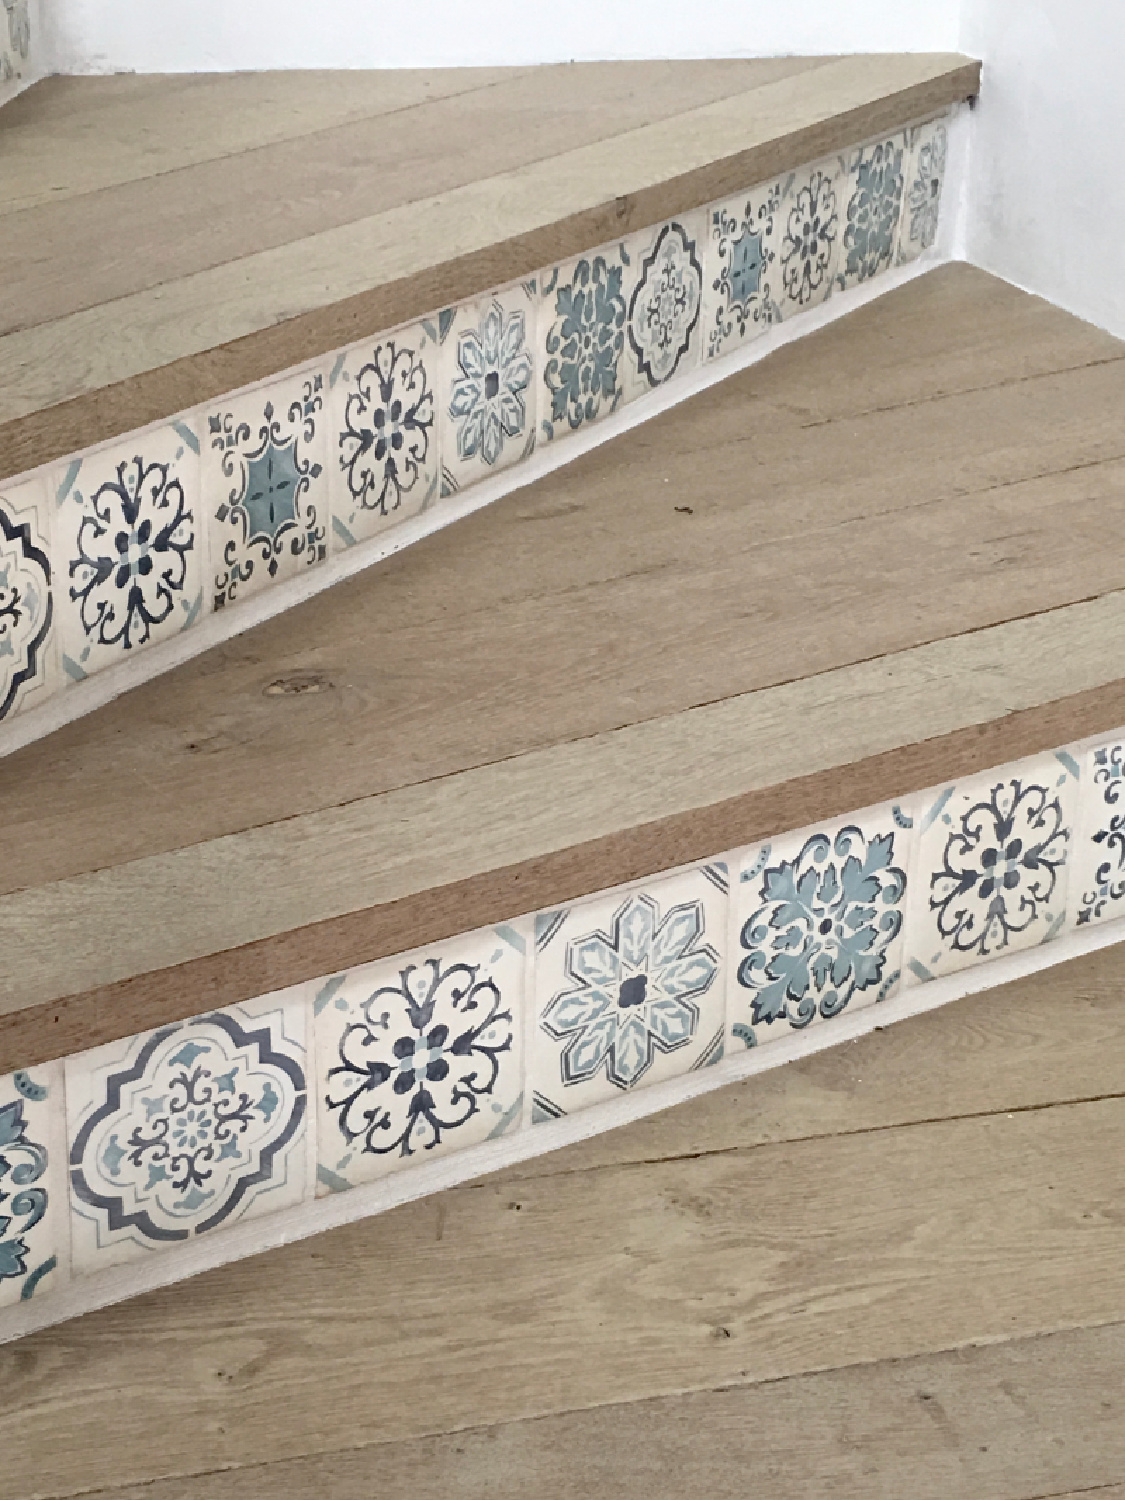 Detail of Mediterranean tile on stairs. Steve Giannetti designed modern Mediterranean Malibu home with white oak, natural finishes, limestone, and Old World style. #giannettihome #patinastyle #patinahomes